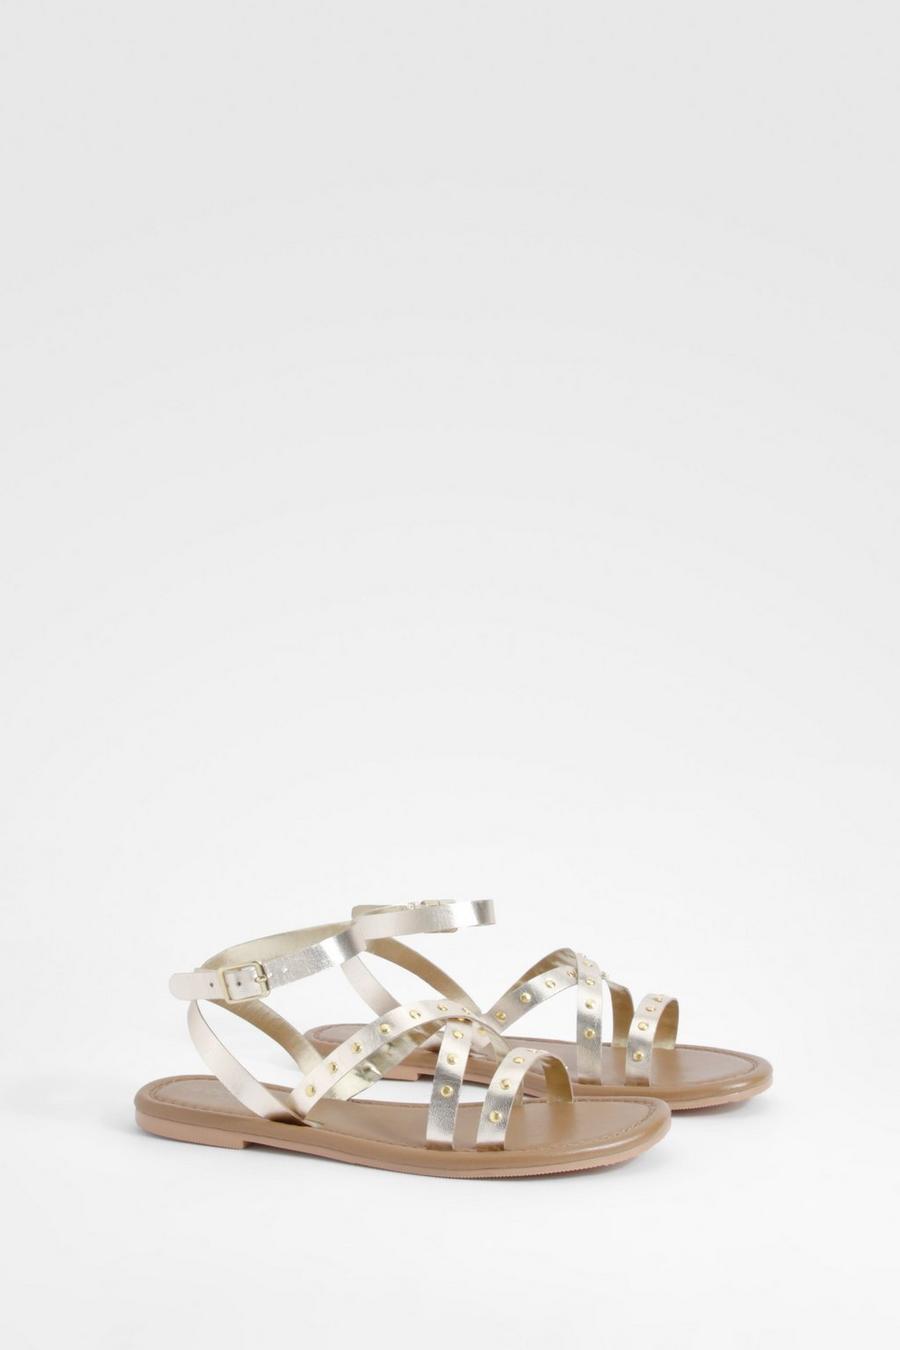 Gold Wide Width Leather Studded 2 Part Sandals